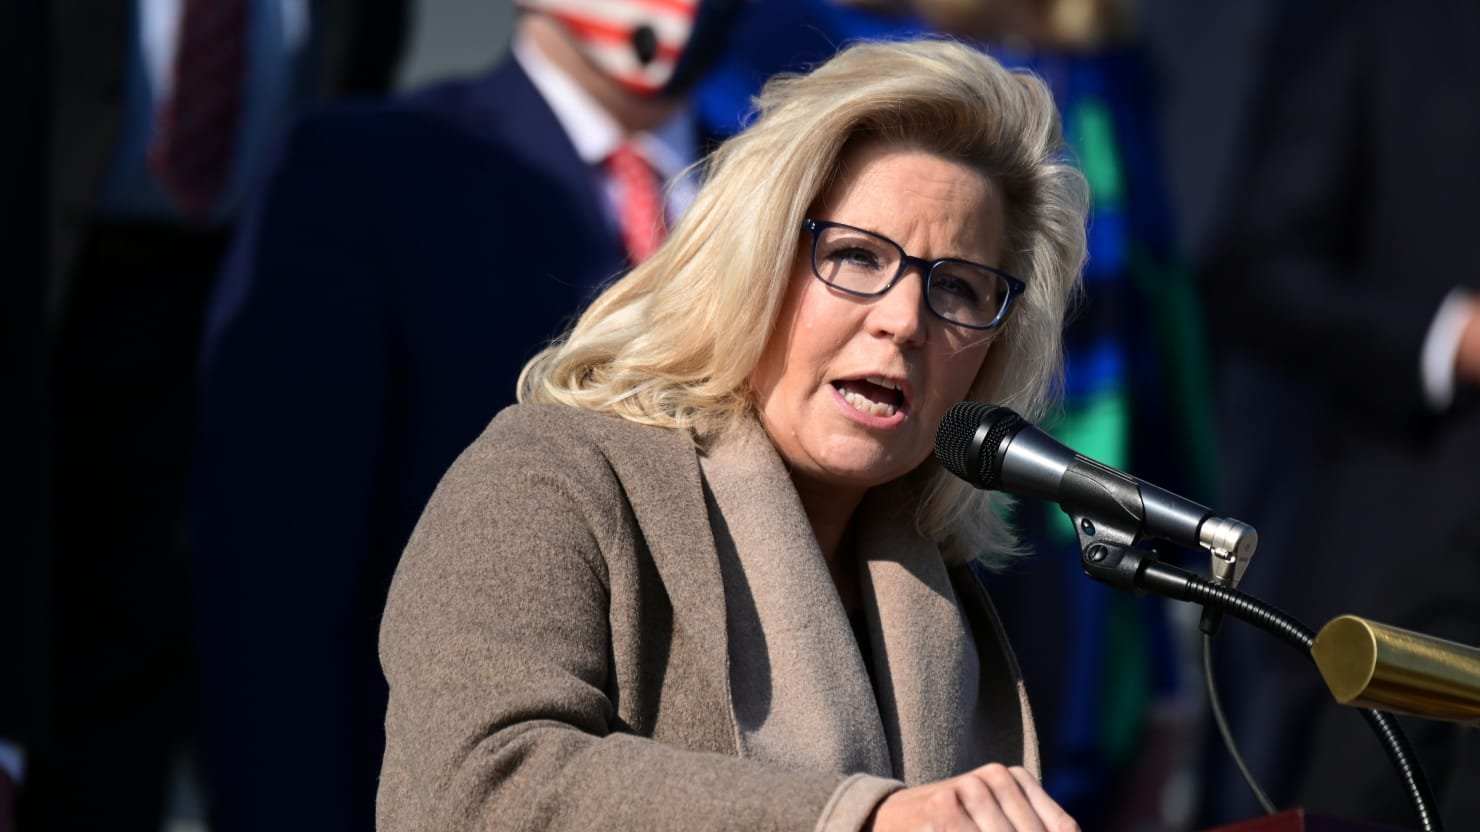 Wyoming Rep. Liz Cheney Says She Will Vote to Impeach Trump Over Capitol Riot